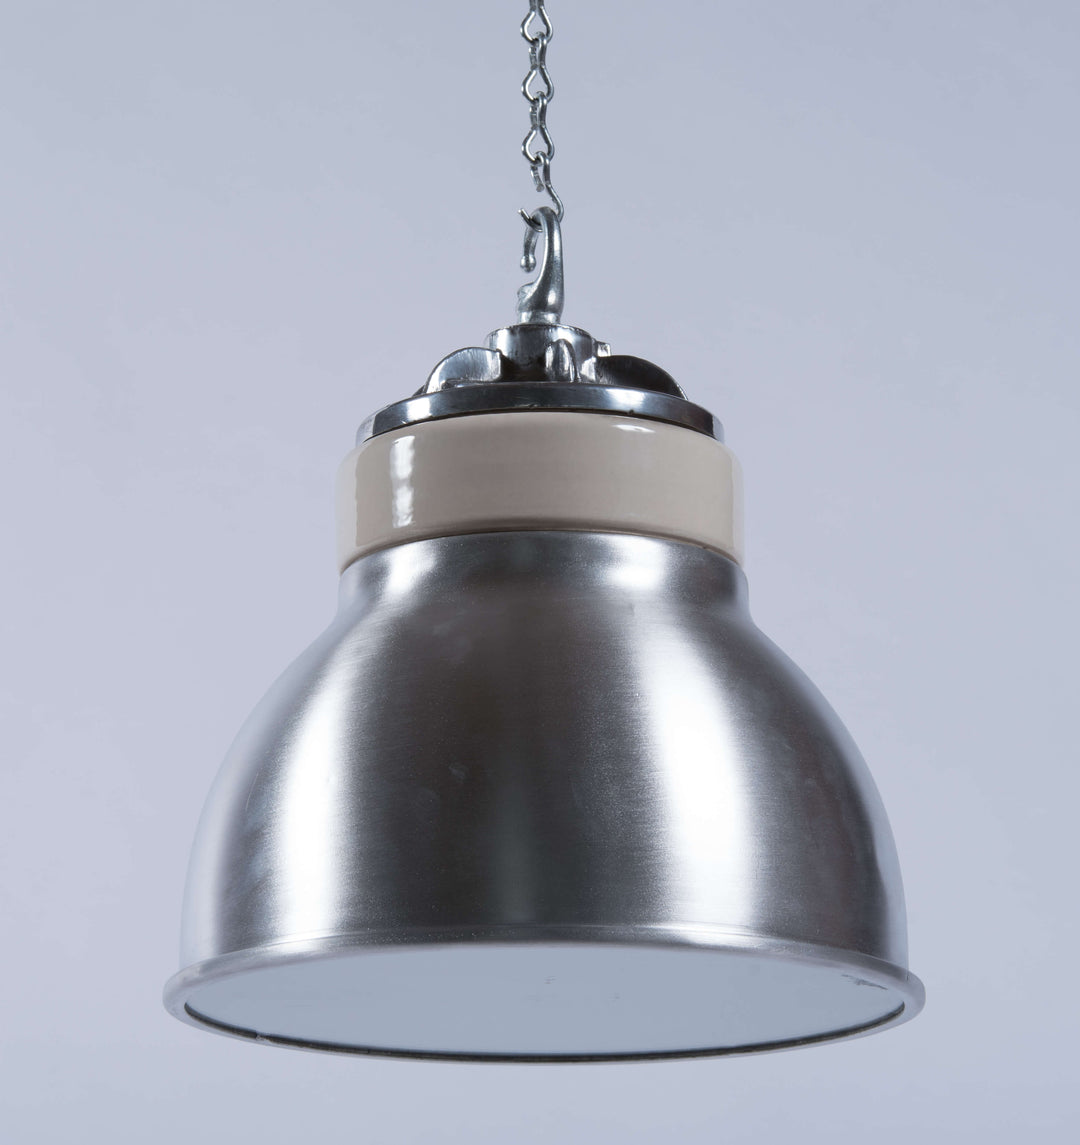 Vintage Industrial Pendant Lights Reclaimed from Ceramics Factory